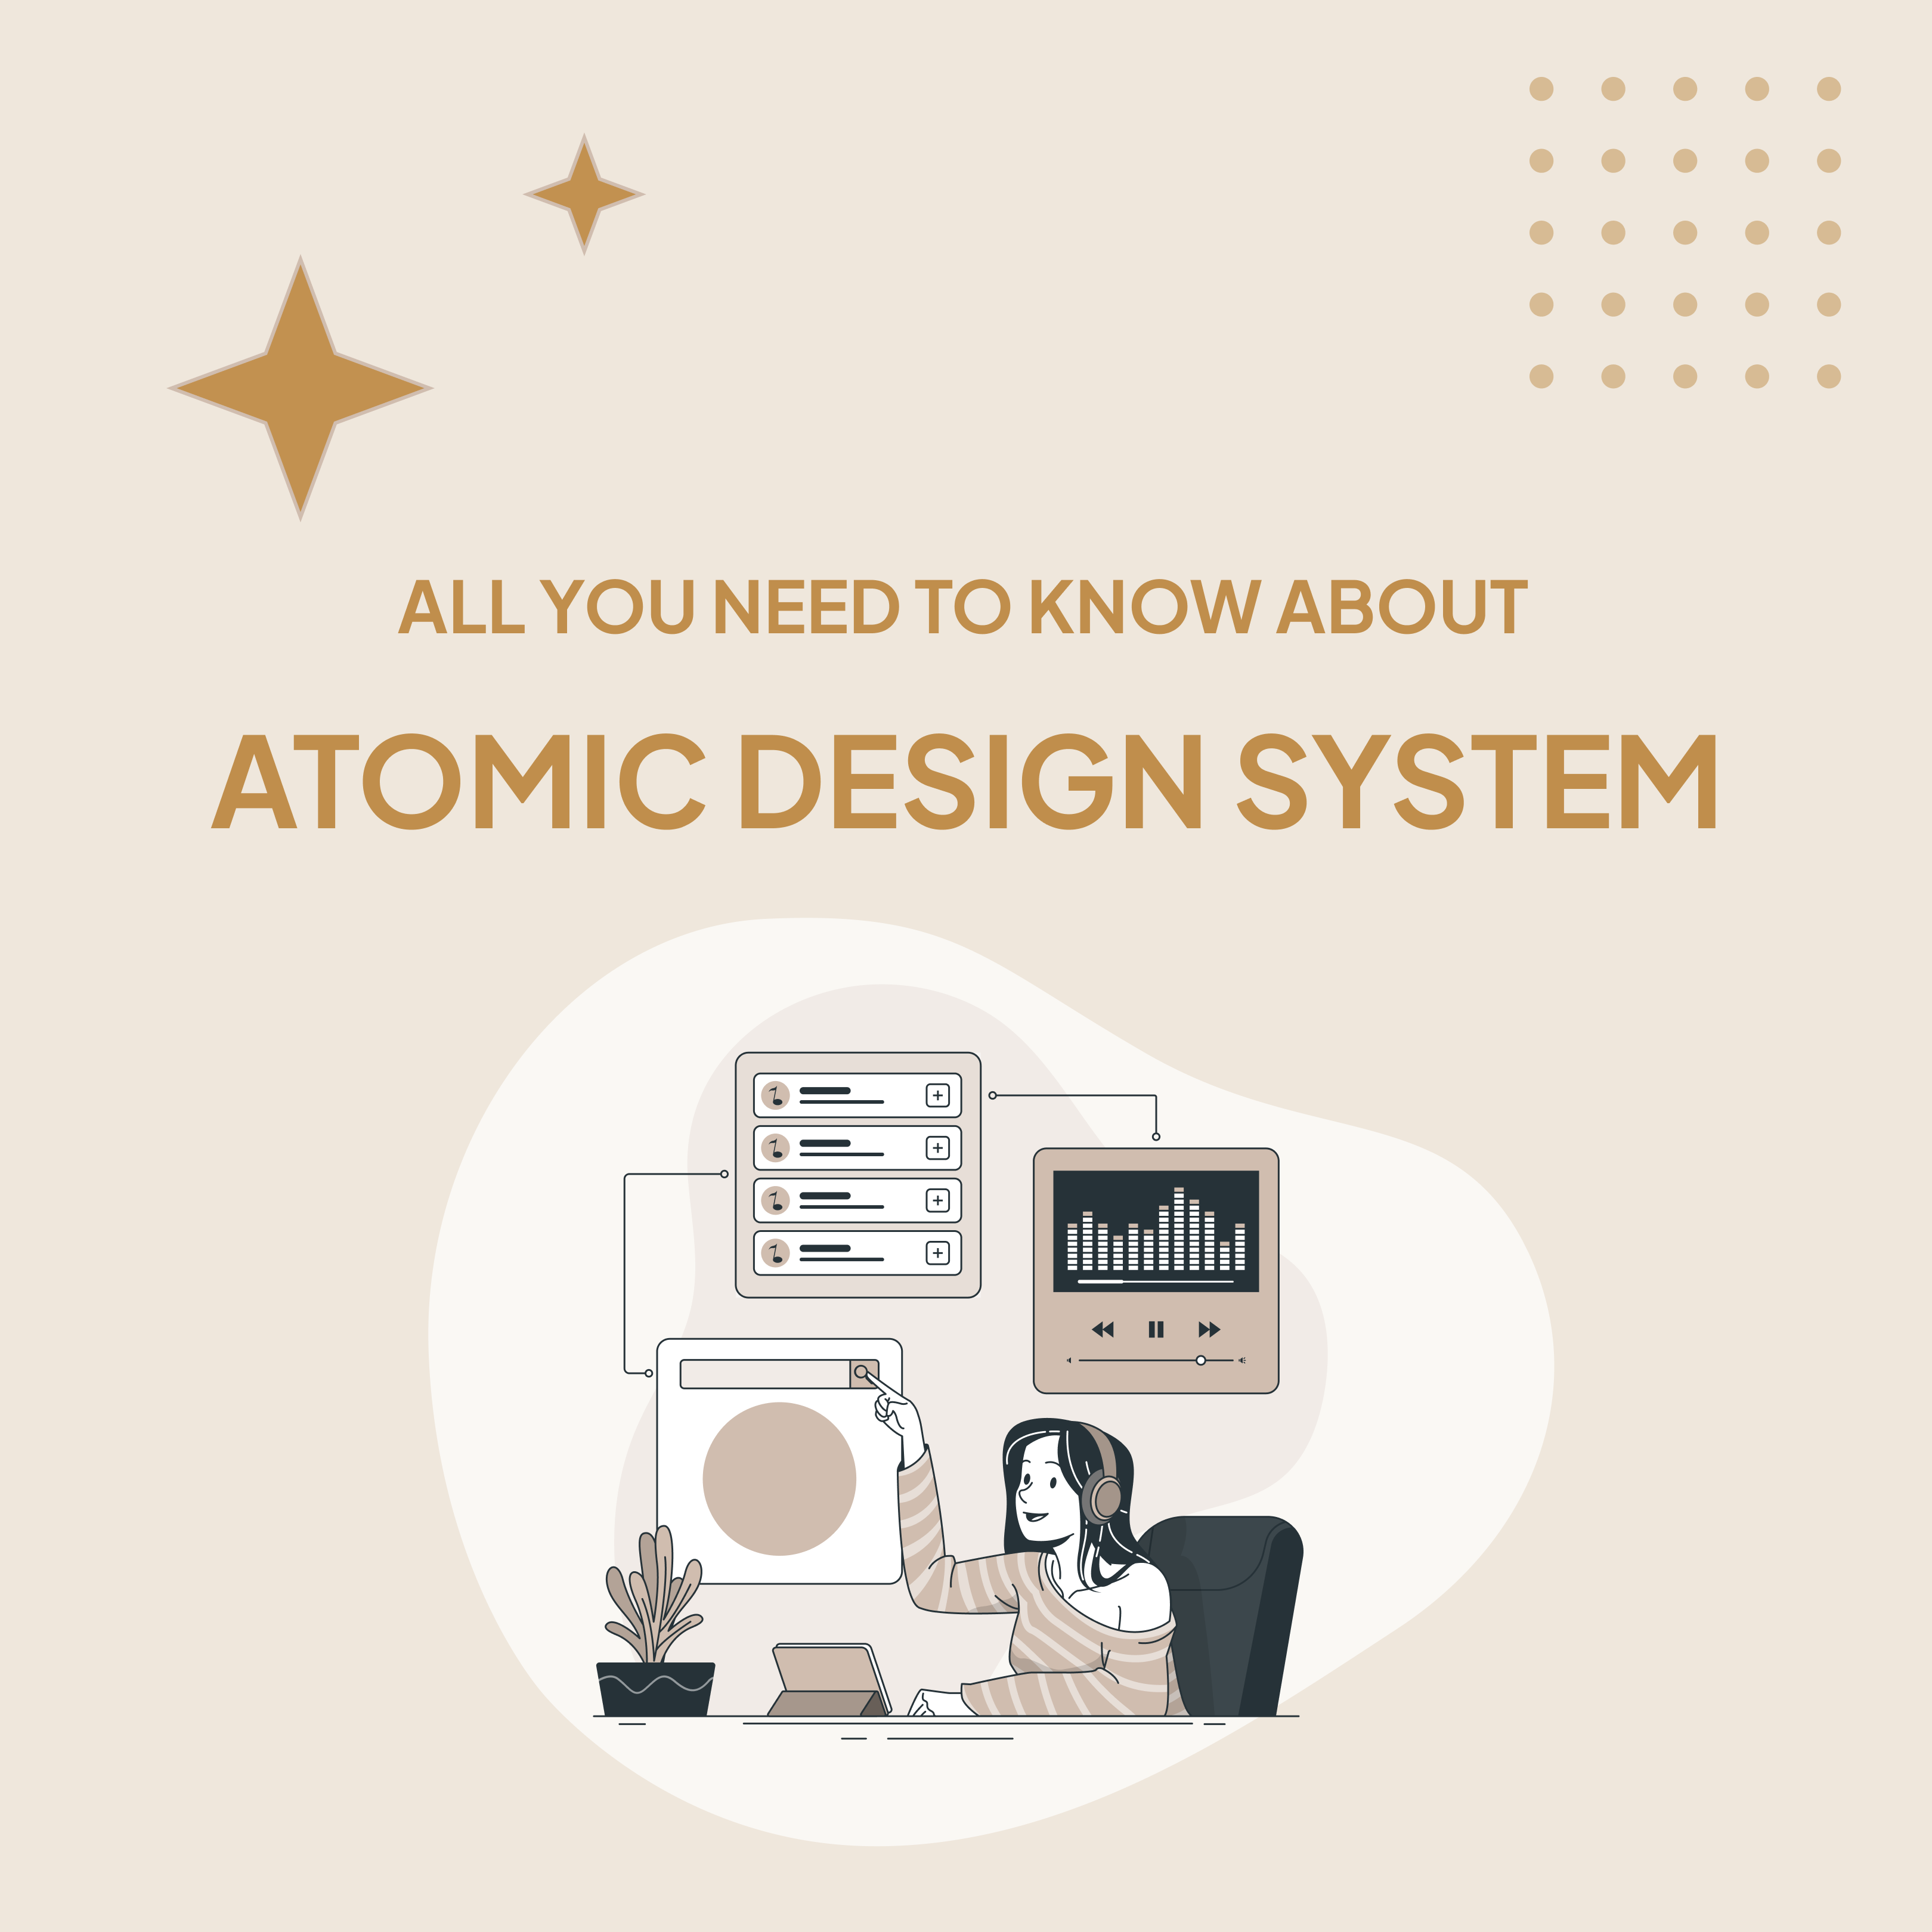 What is Atomic Design System